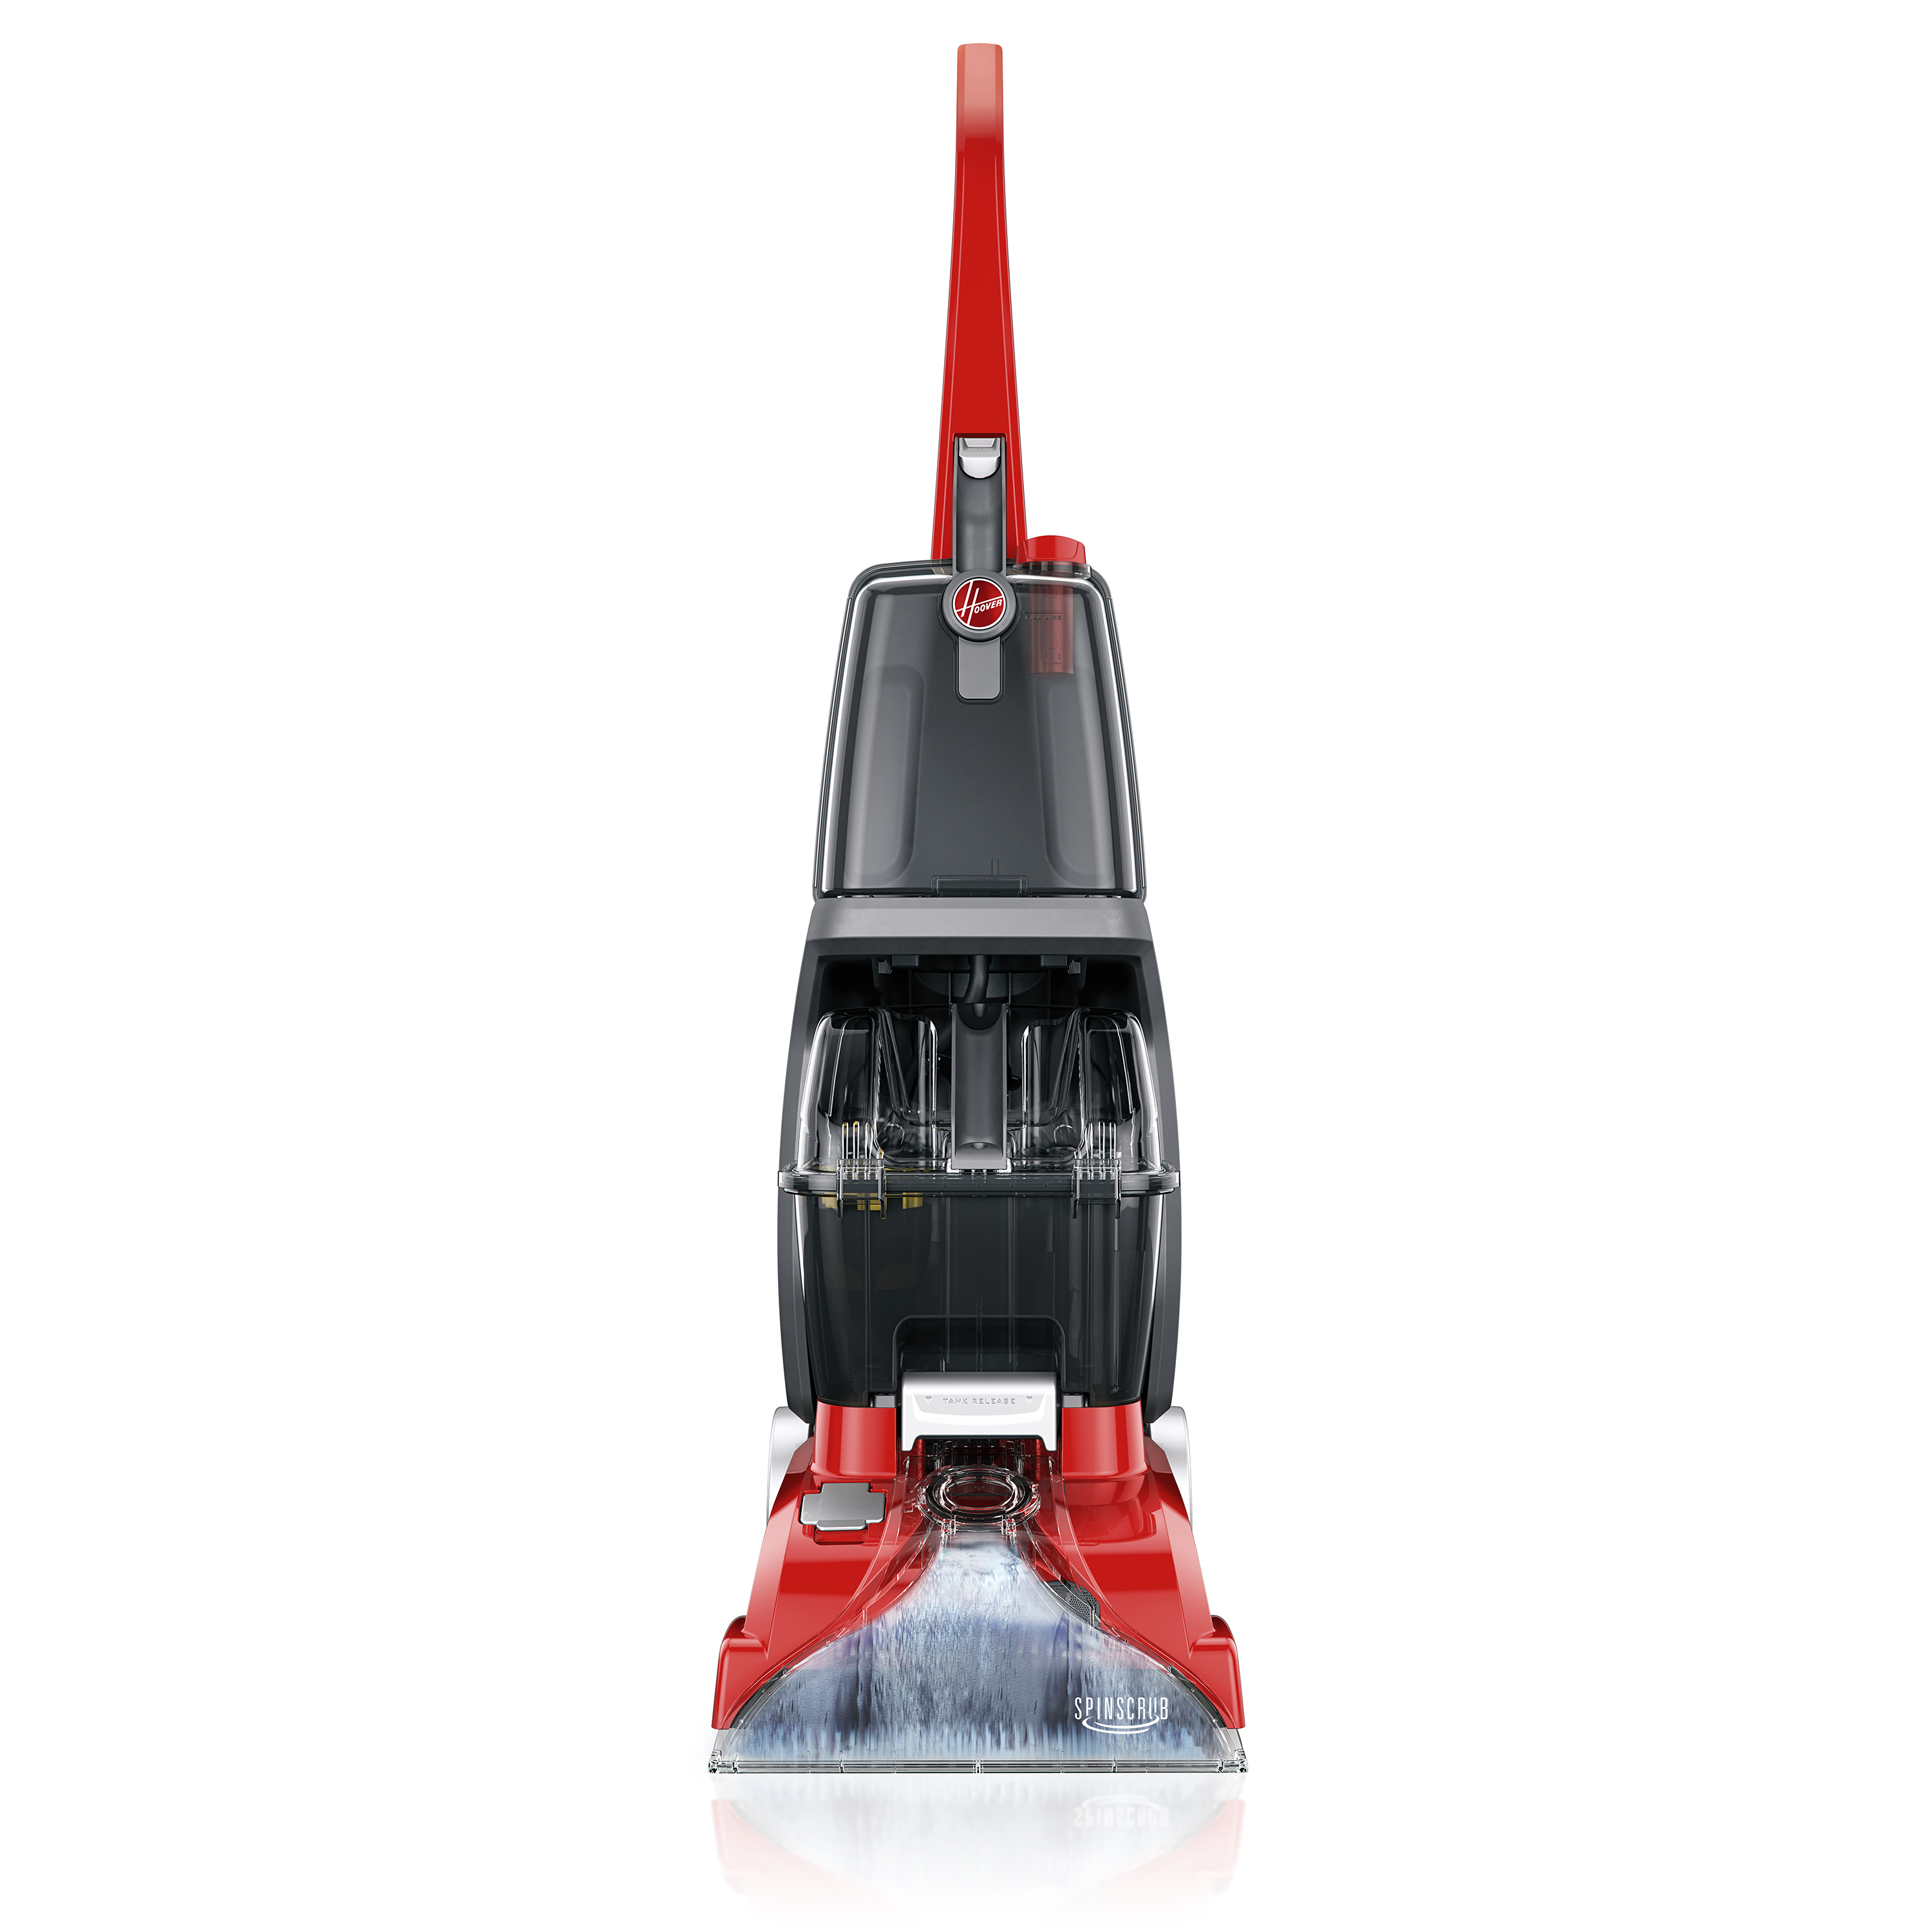 Hoover PowerScrub Carpet Cleaner with SpinScrub Technology, FH50135 - image 1 of 14